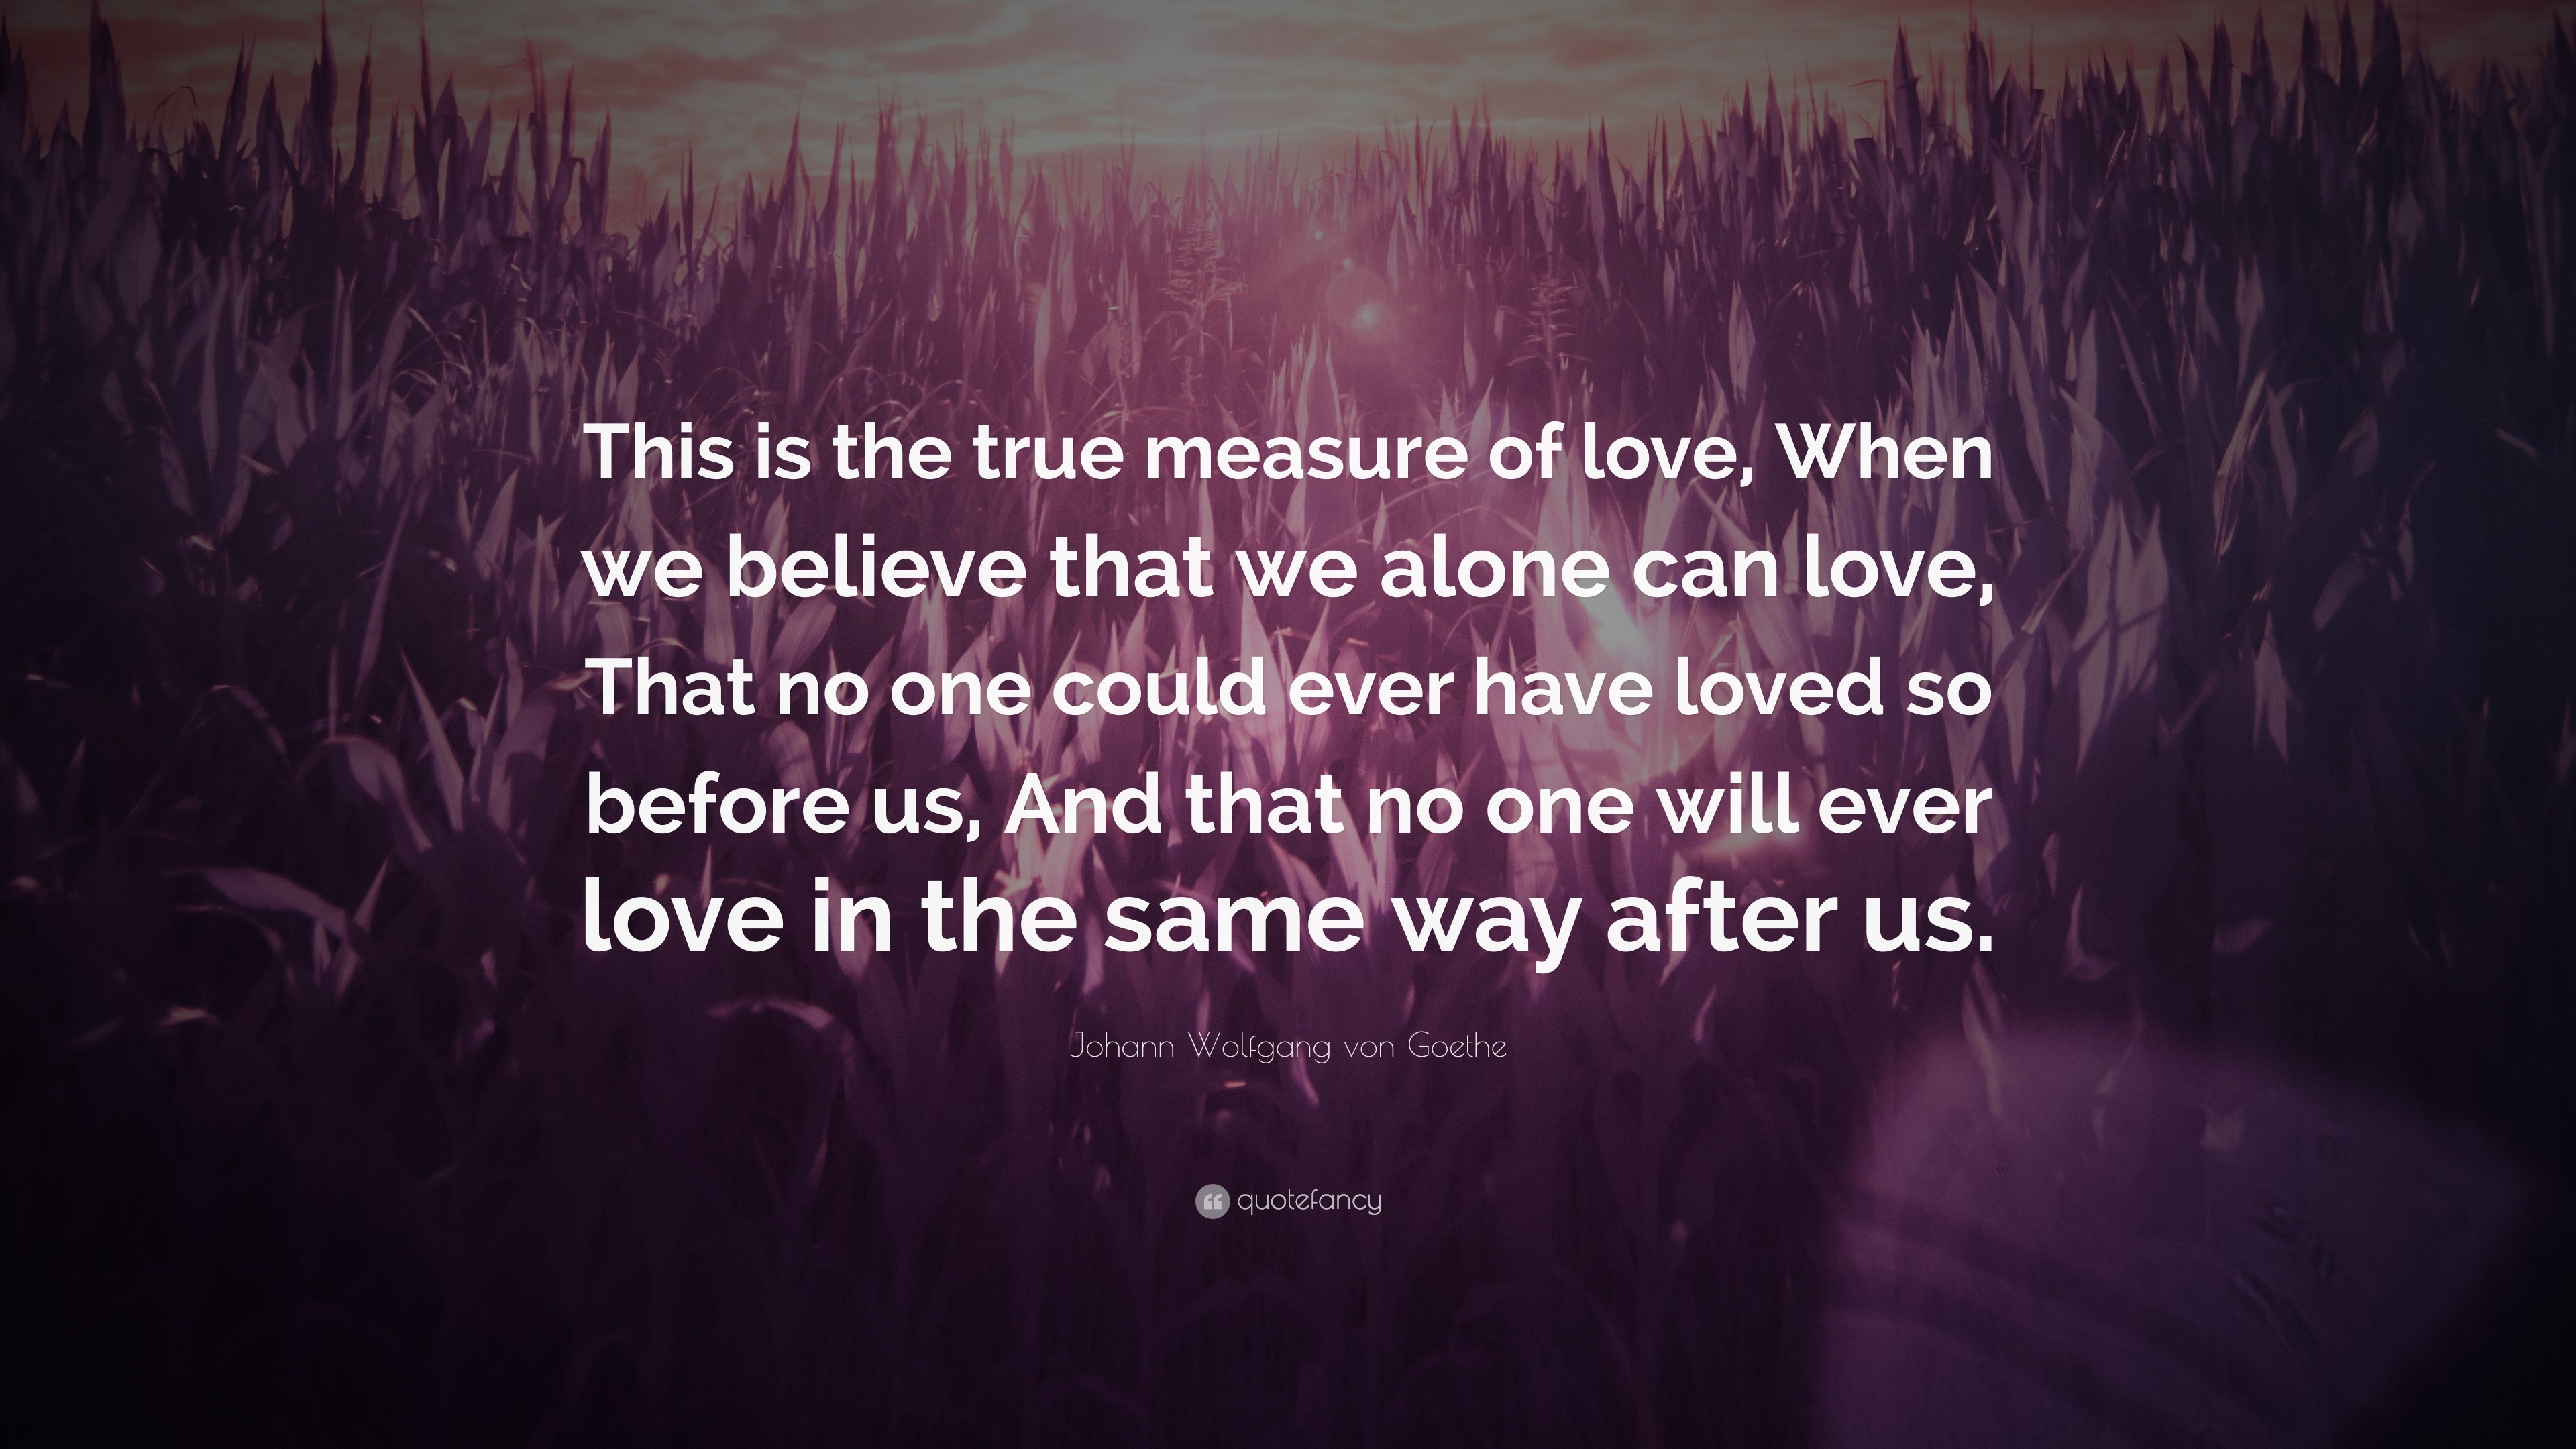 Johann Wolfgang von Goethe Quote “This is the true measure of love